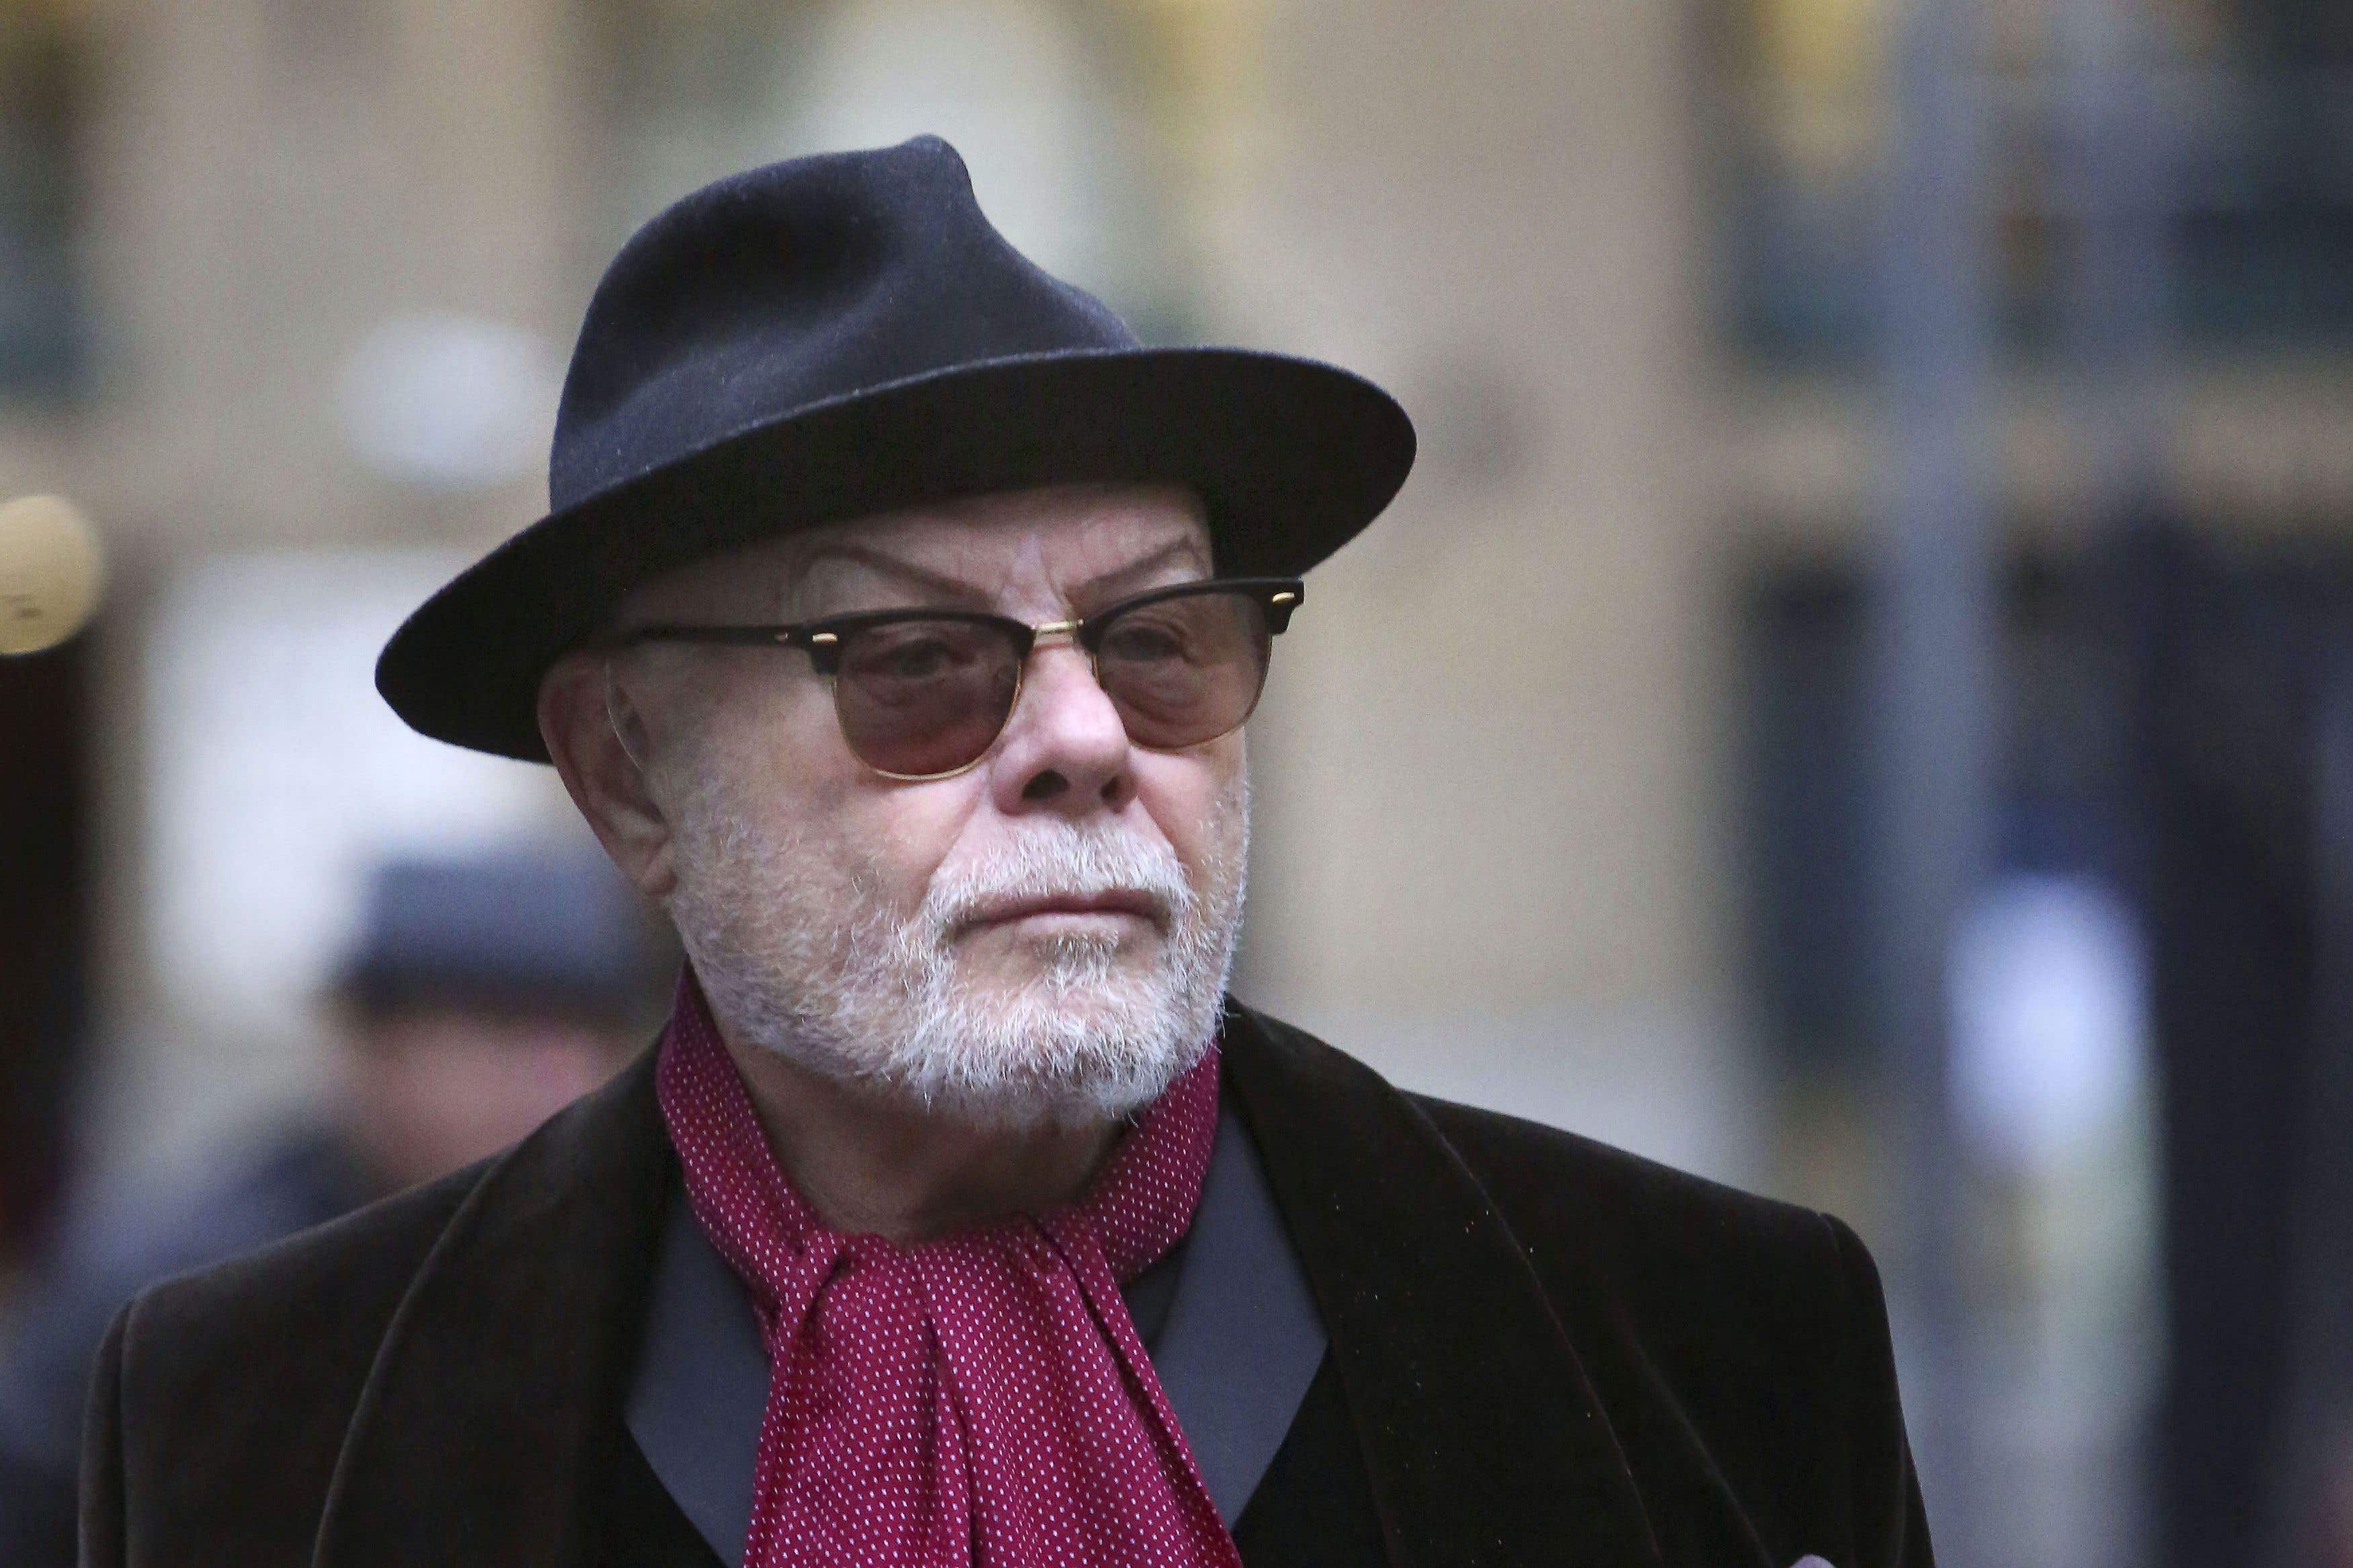 A victim of former pop star Gary Glitter is bringing a compensation claim against him after suffering ‘the worst kind’ of abuse at his hands, a High Court judge was told